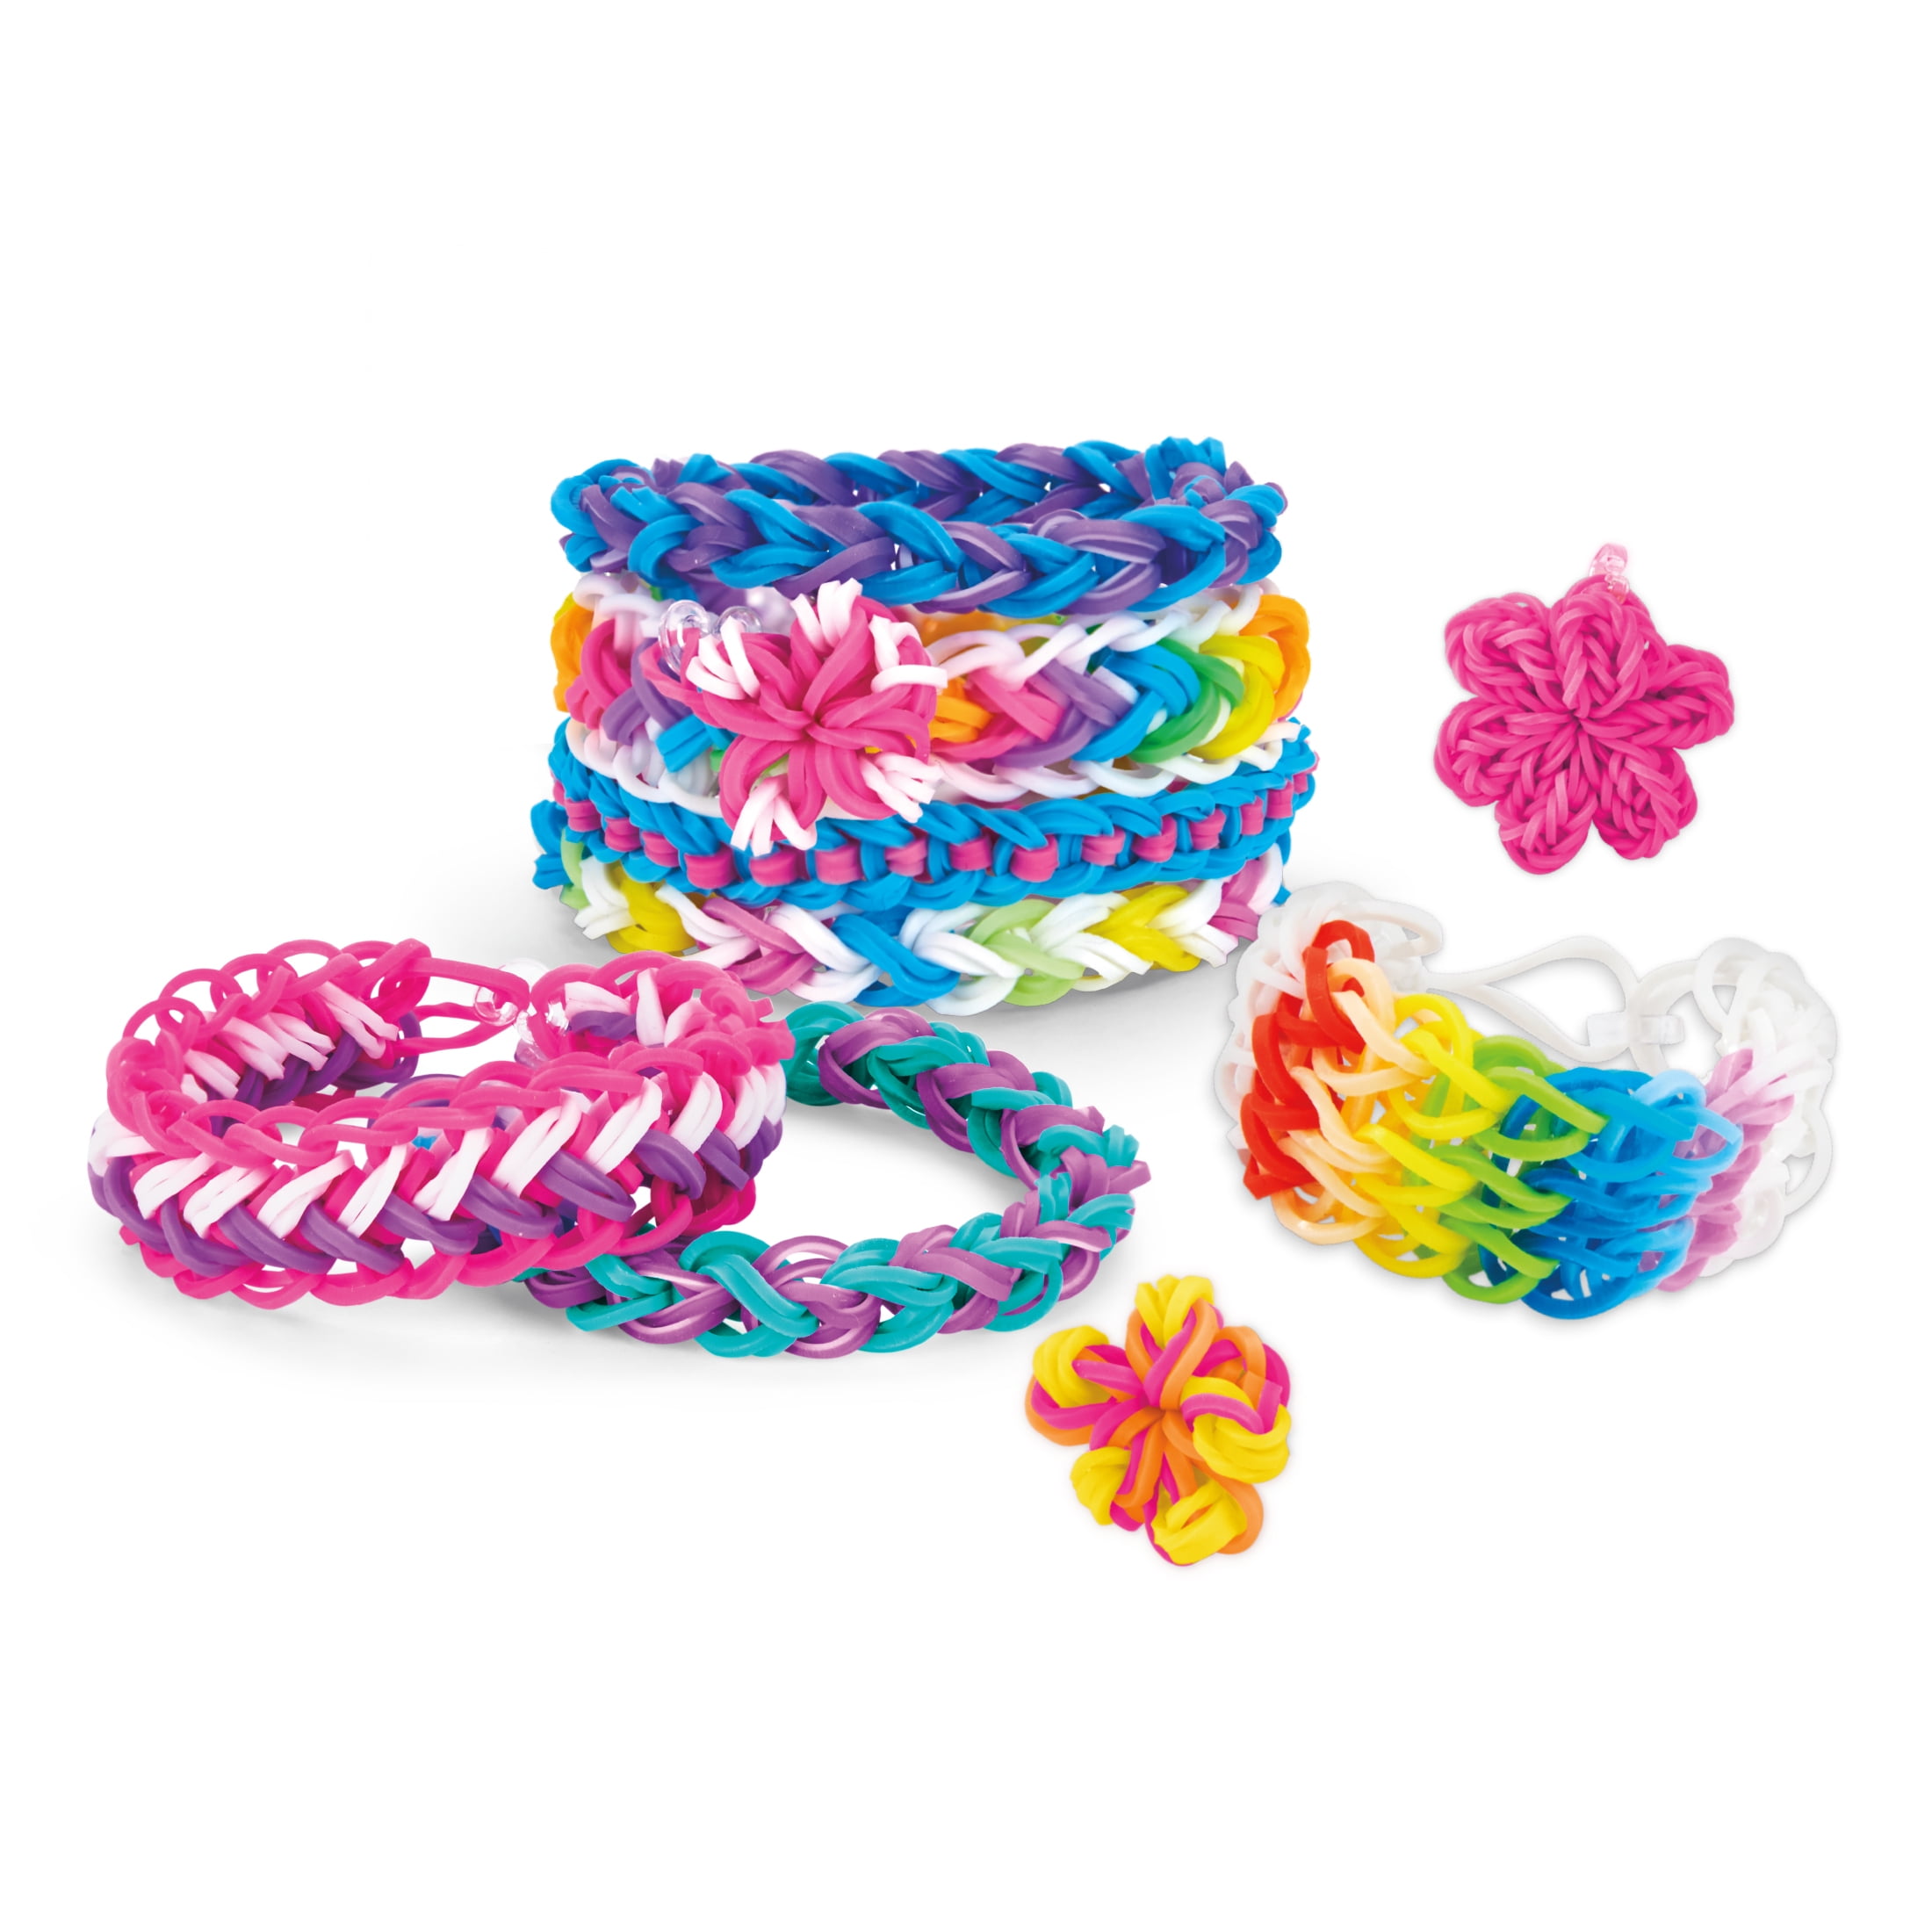 CraZLoom Ultimate Rubber Band Loom - Kiddy Zone